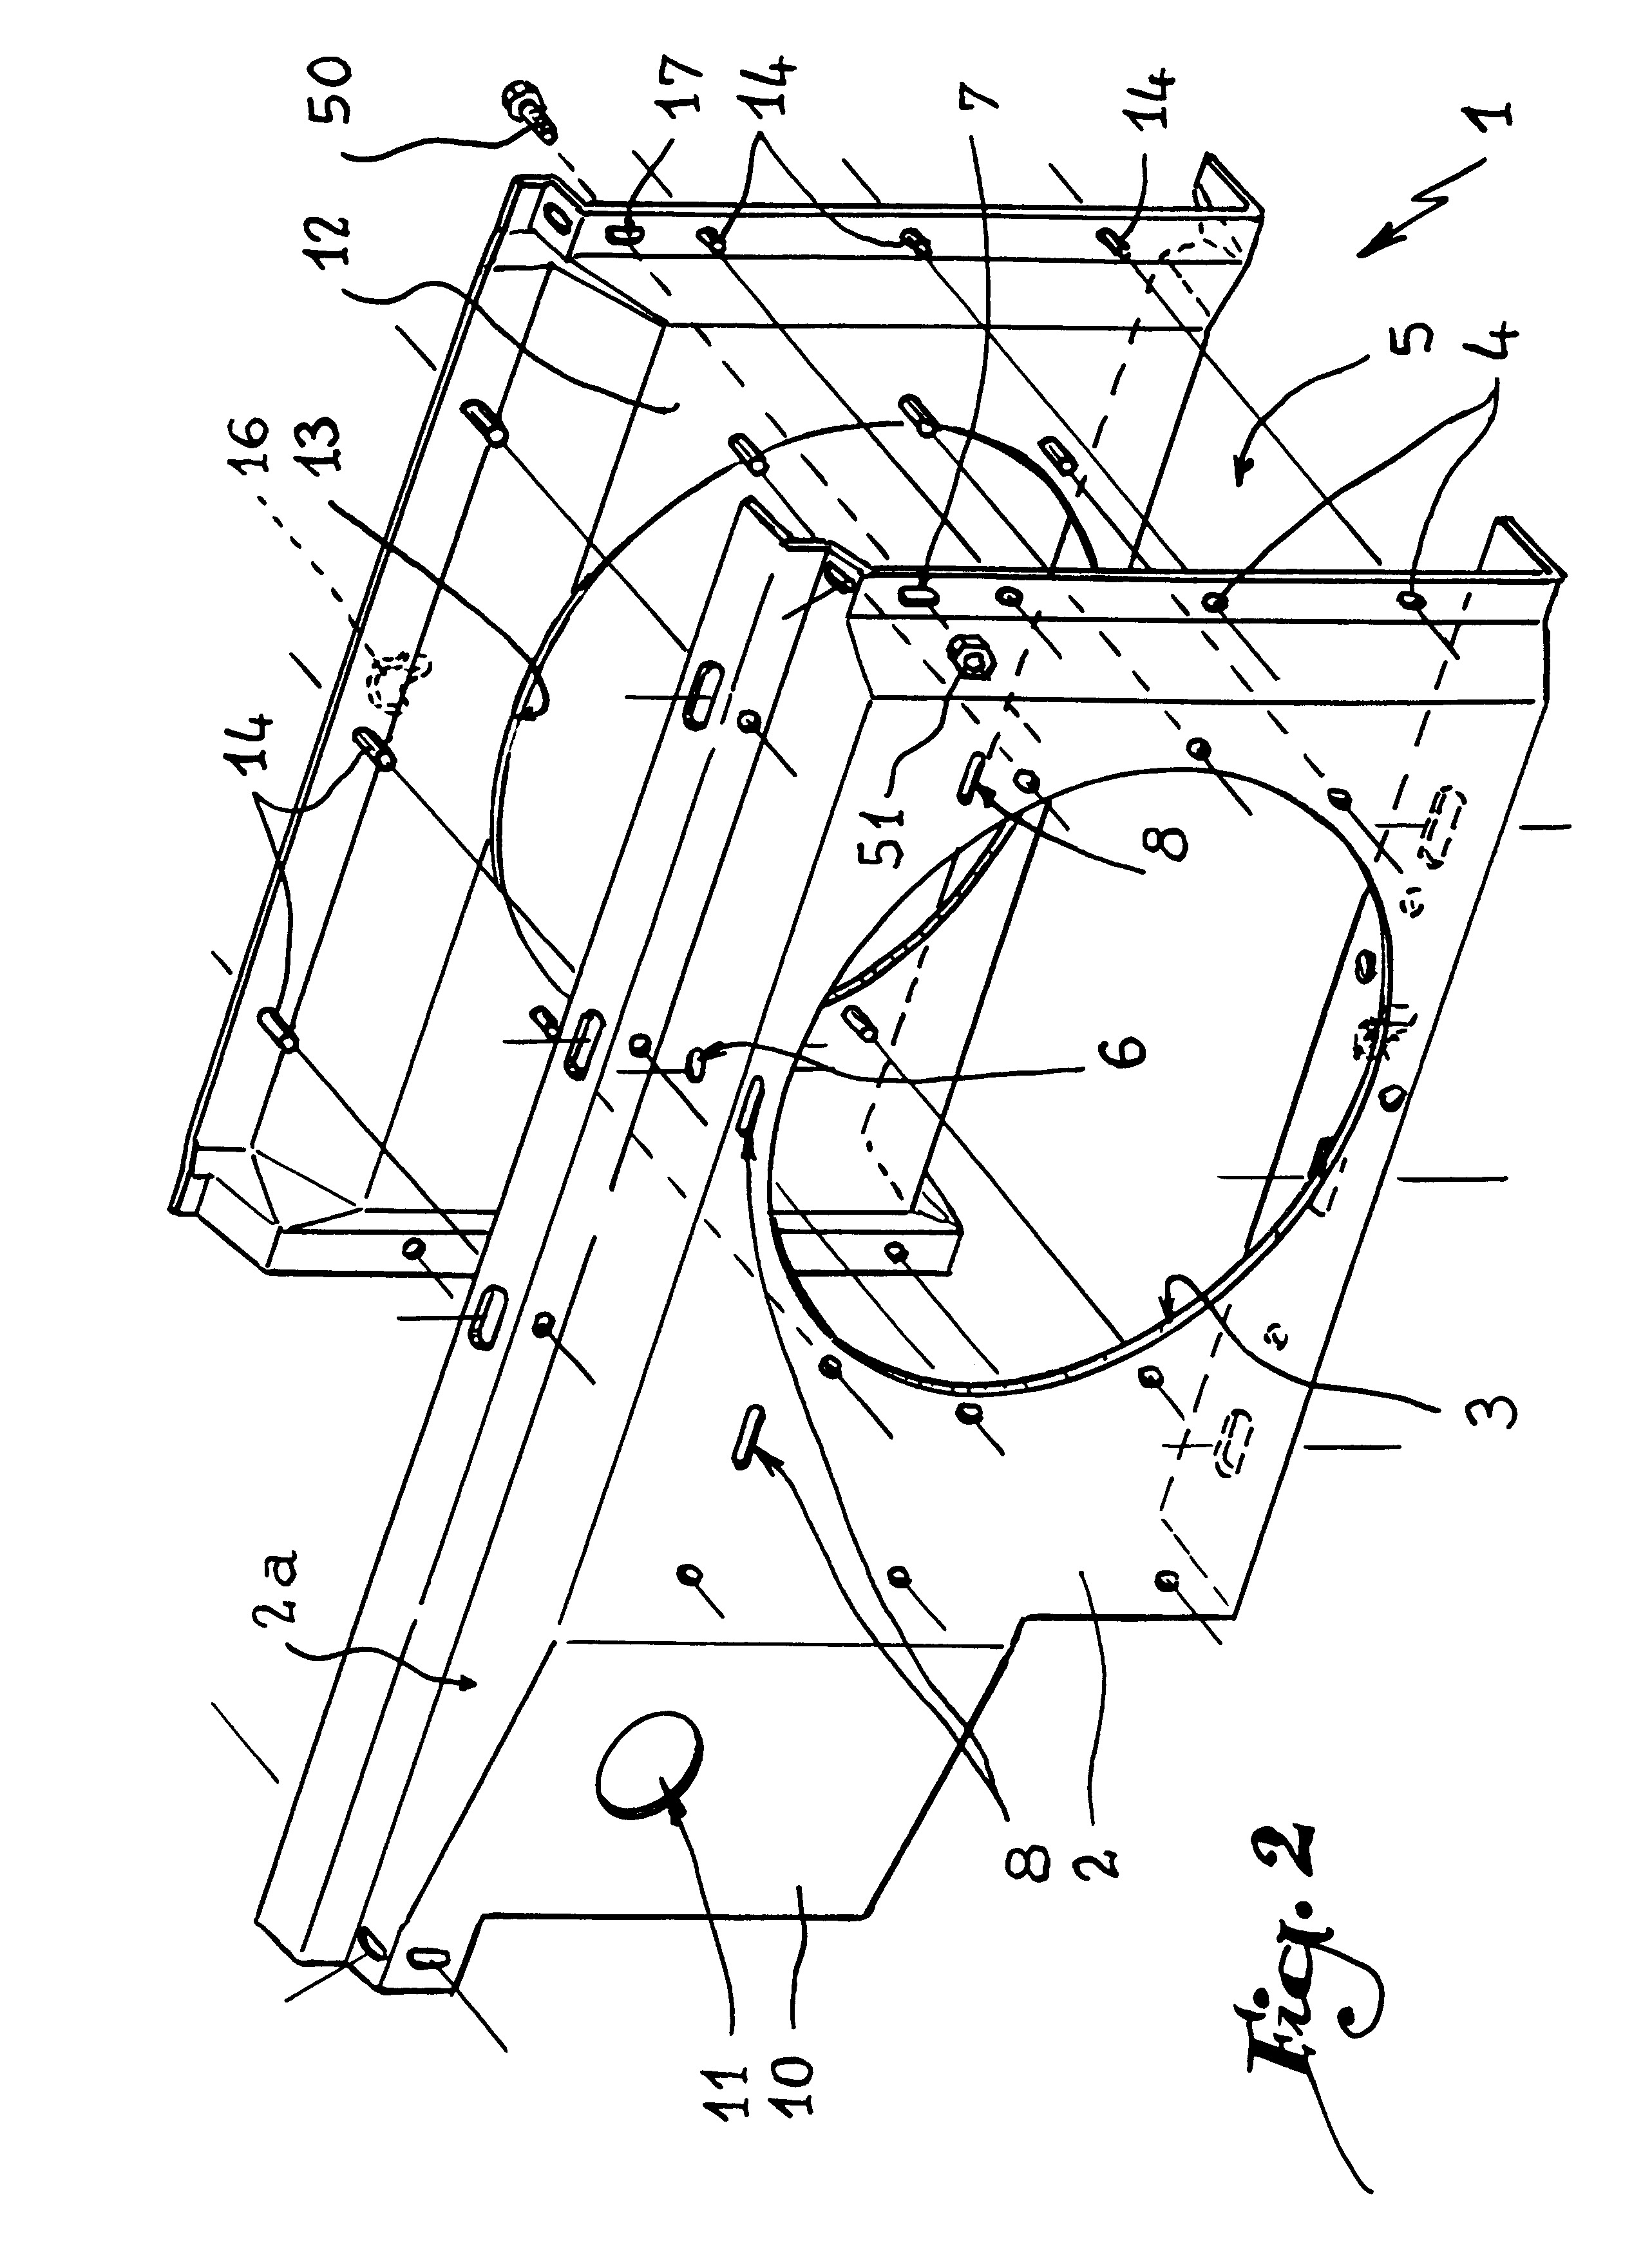 Front panel bodywork element for an automobile including a reinforcing element